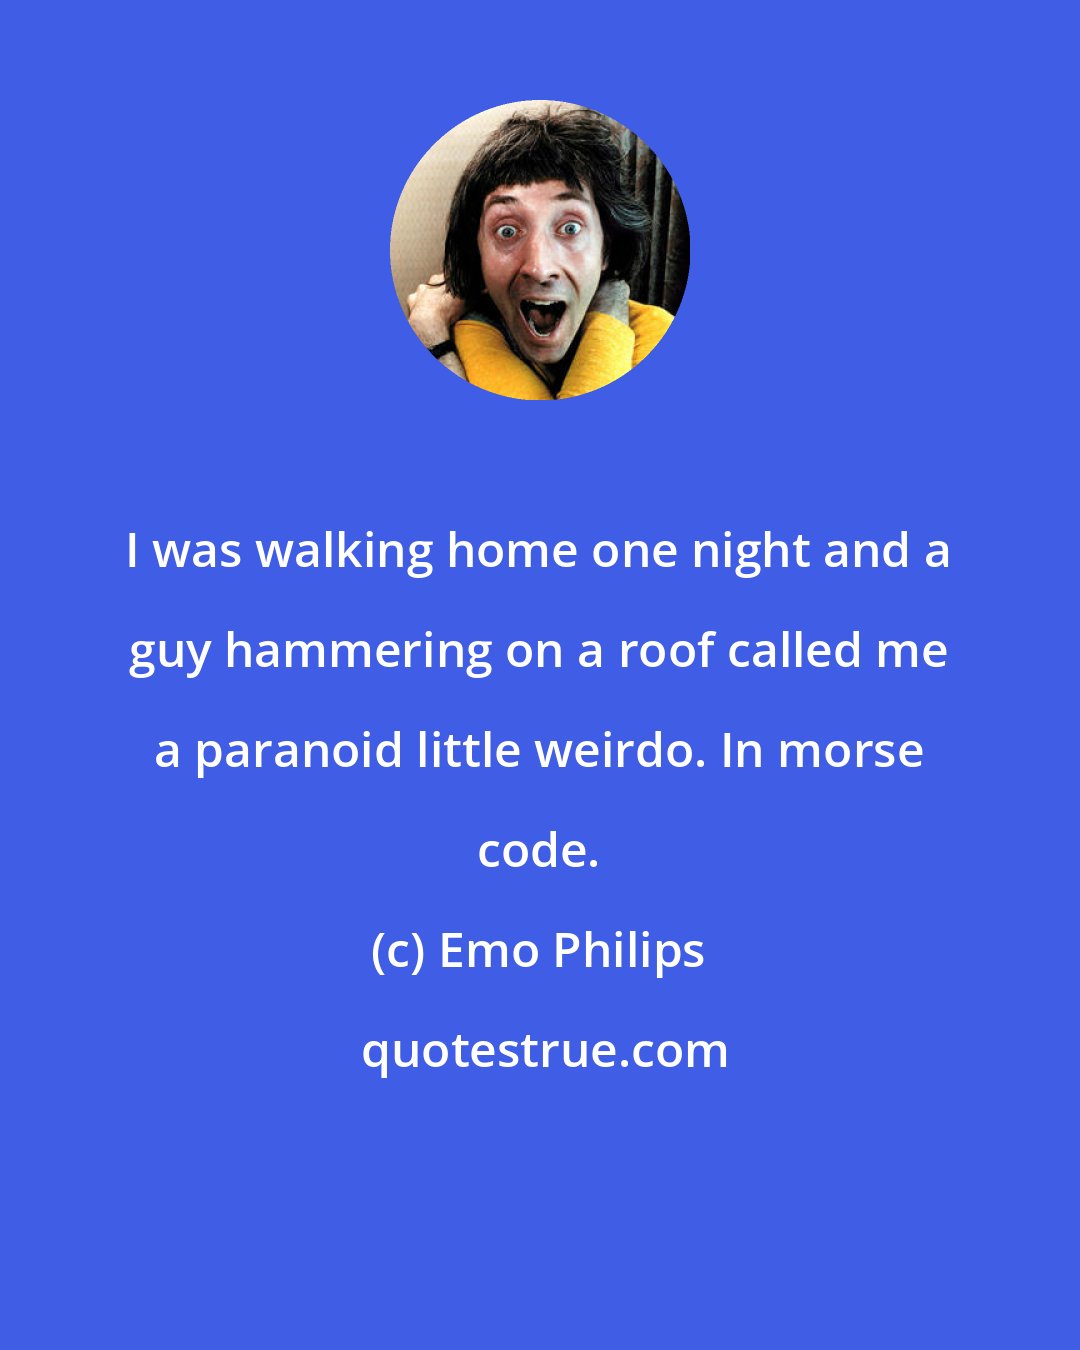 Emo Philips: I was walking home one night and a guy hammering on a roof called me a paranoid little weirdo. In morse code.